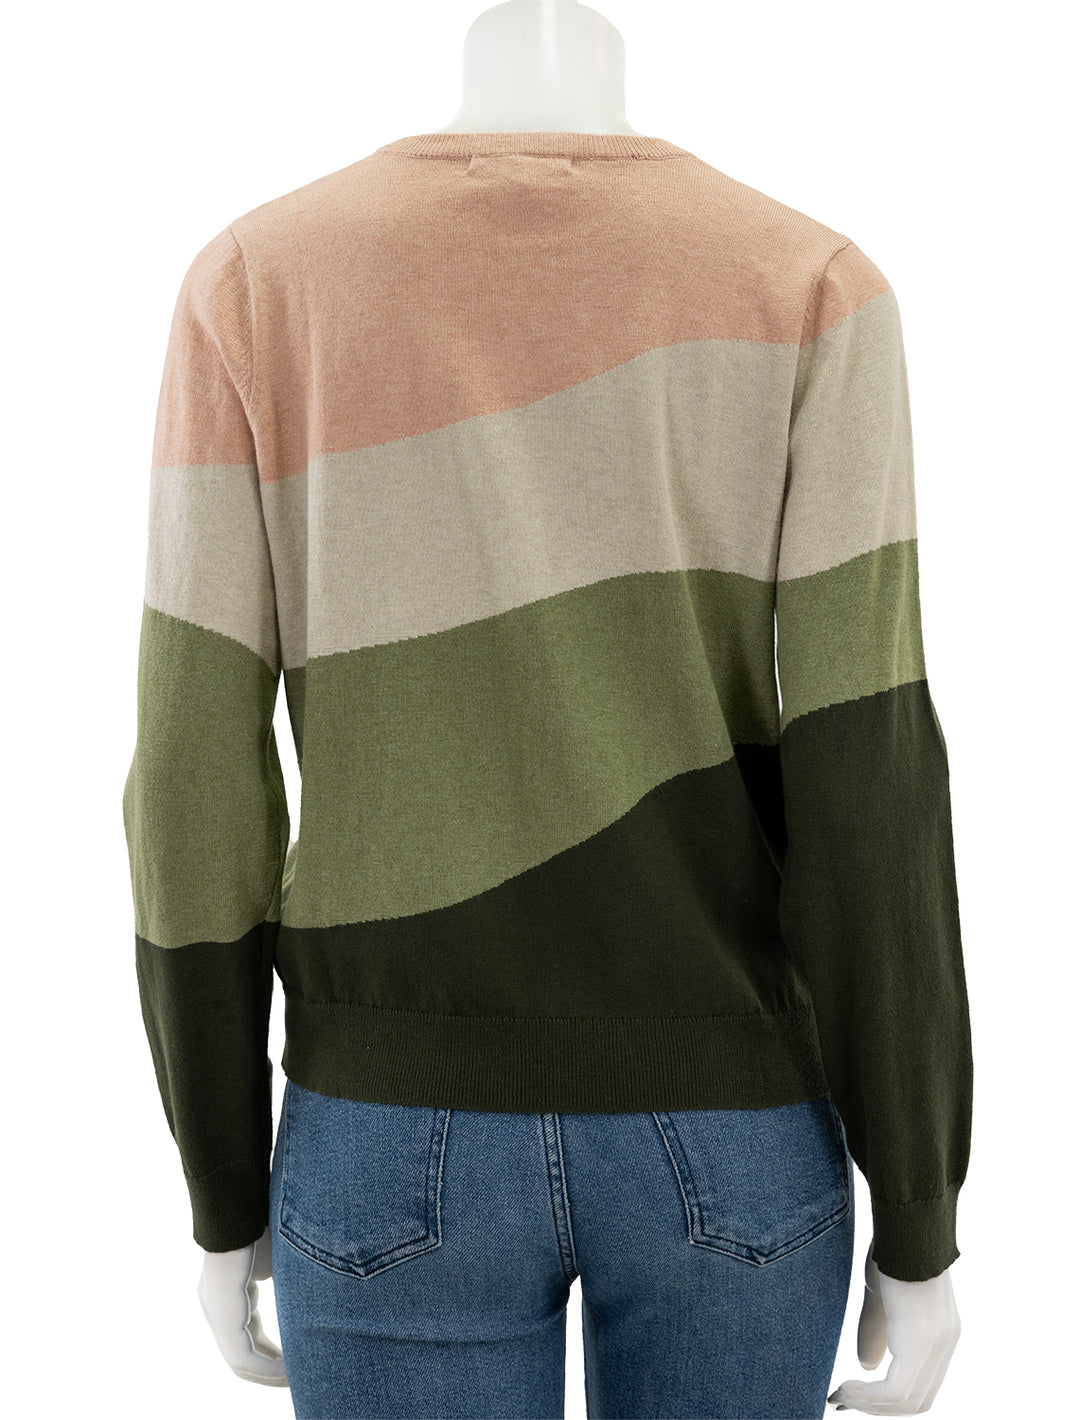 Back view of Marine Layer's scenic sunset sweater.